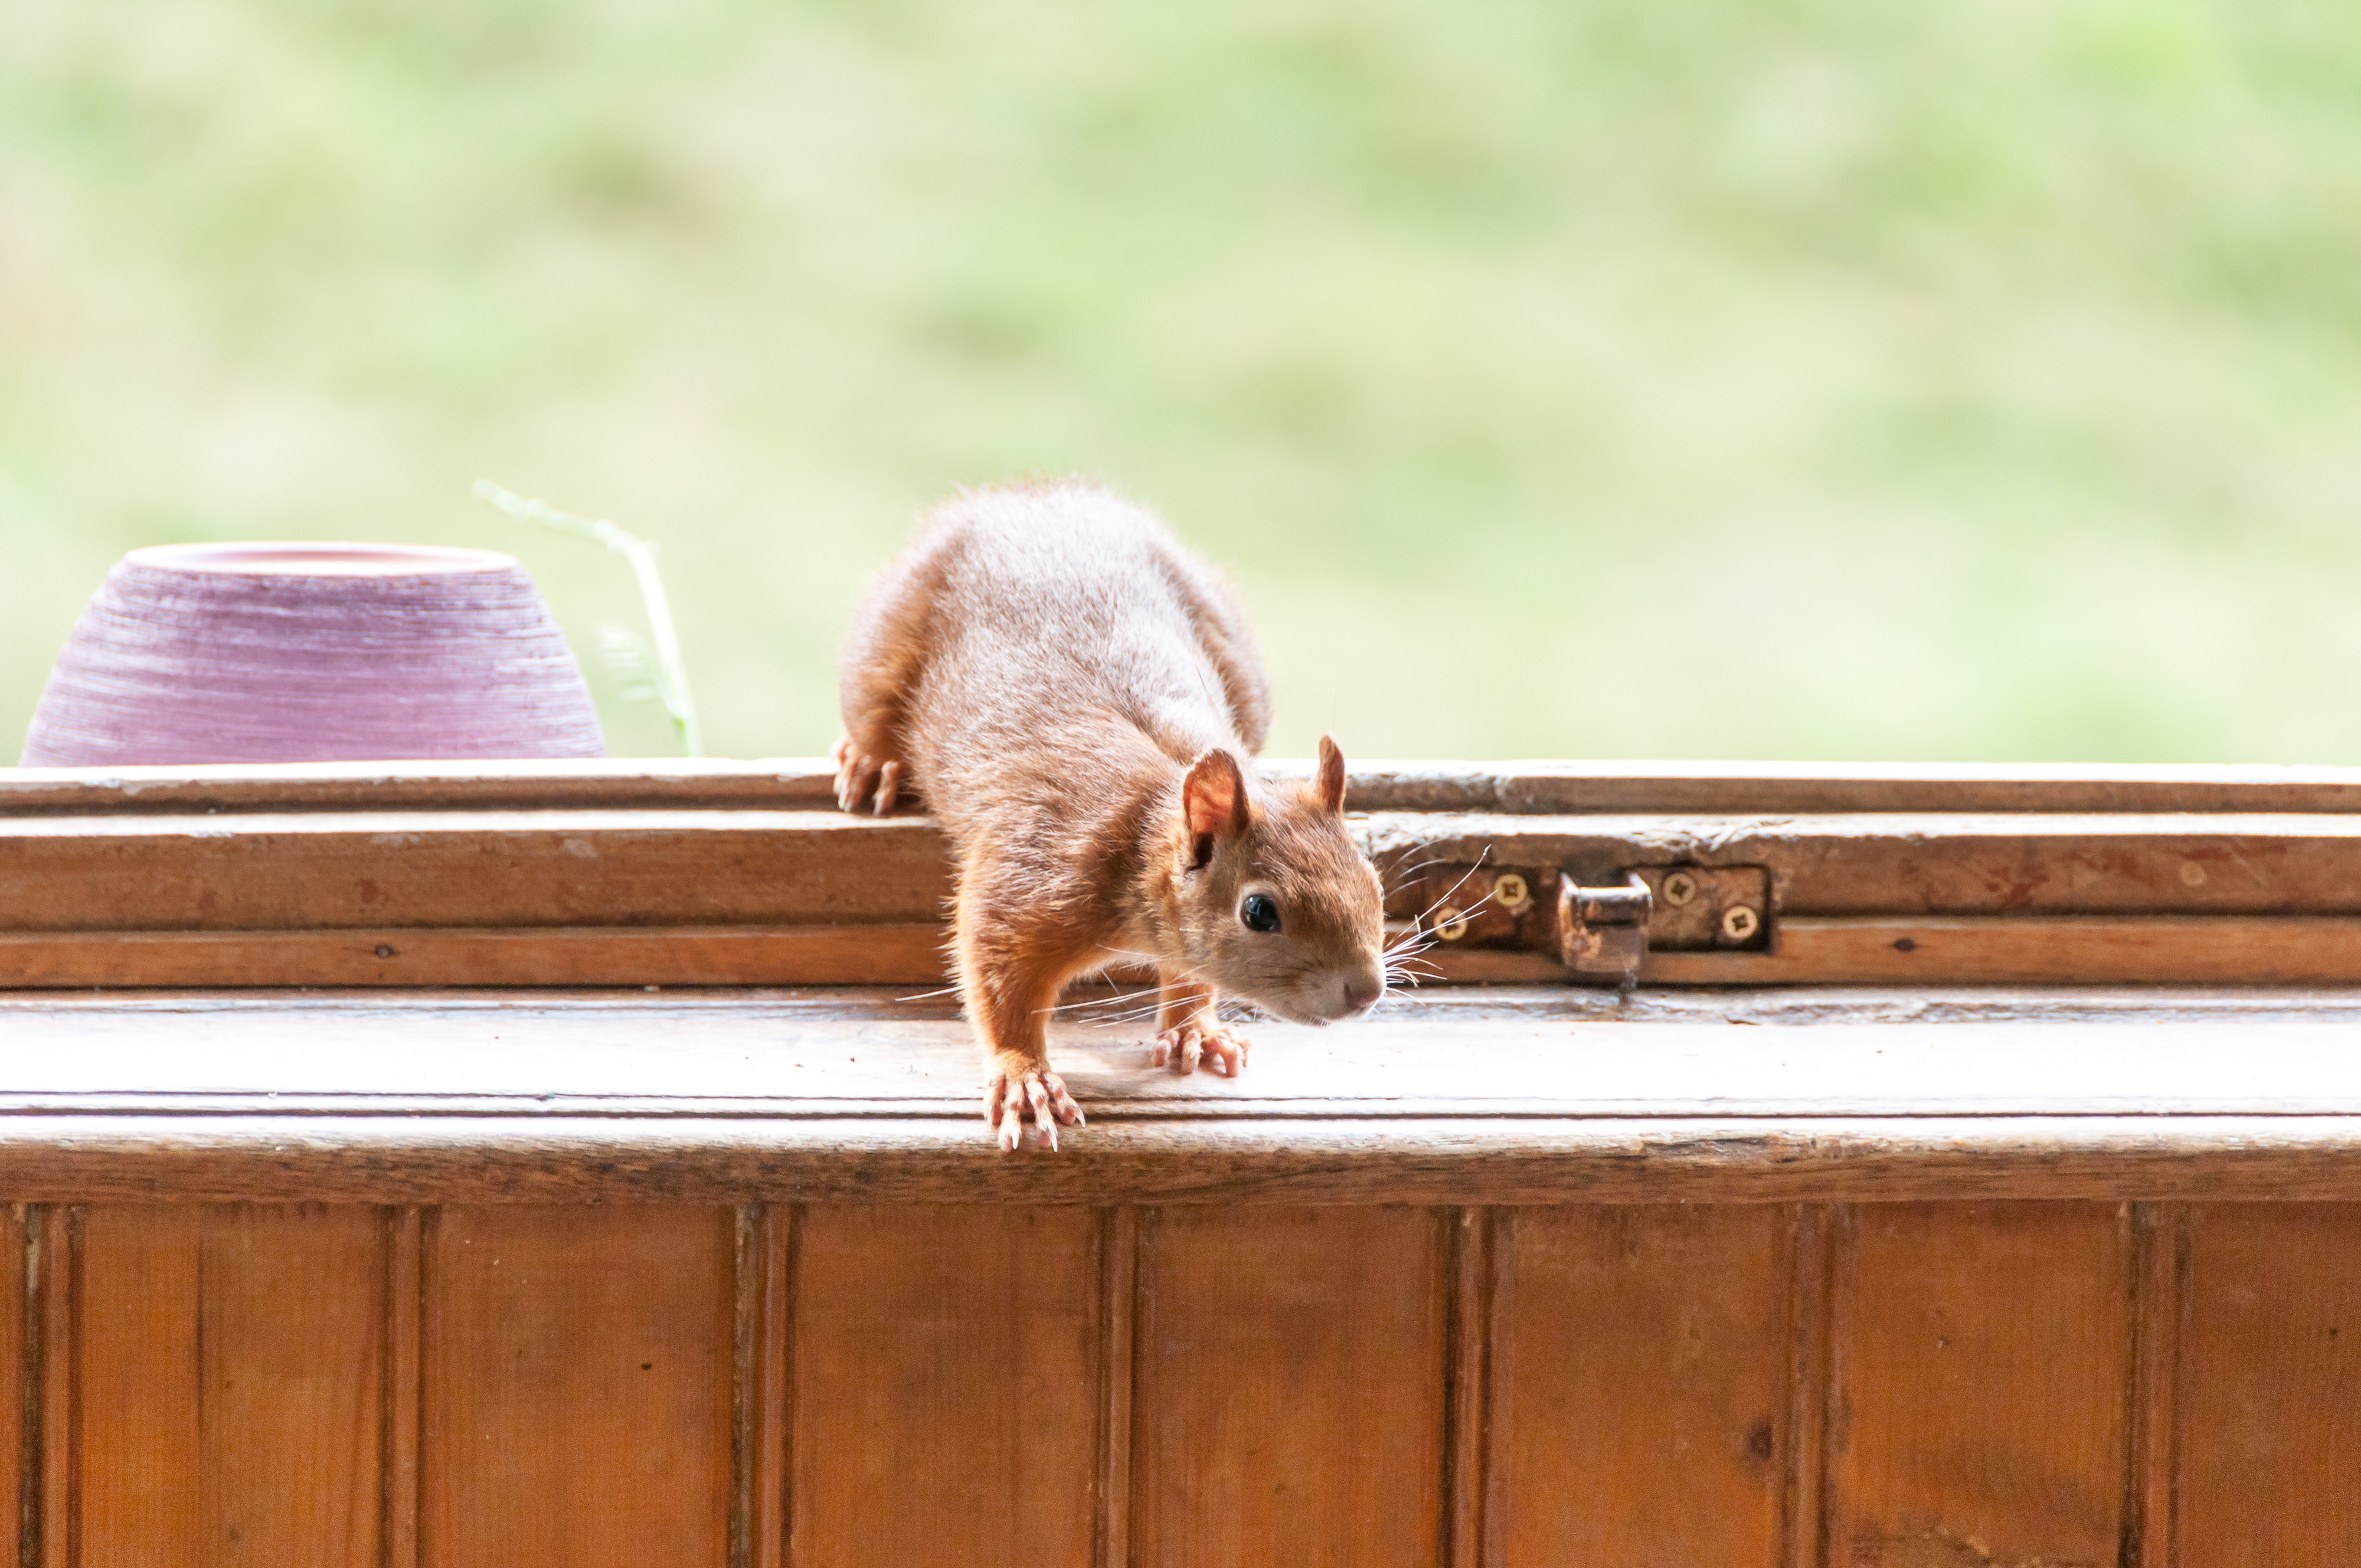 A squirrel inside a house at the windowsill